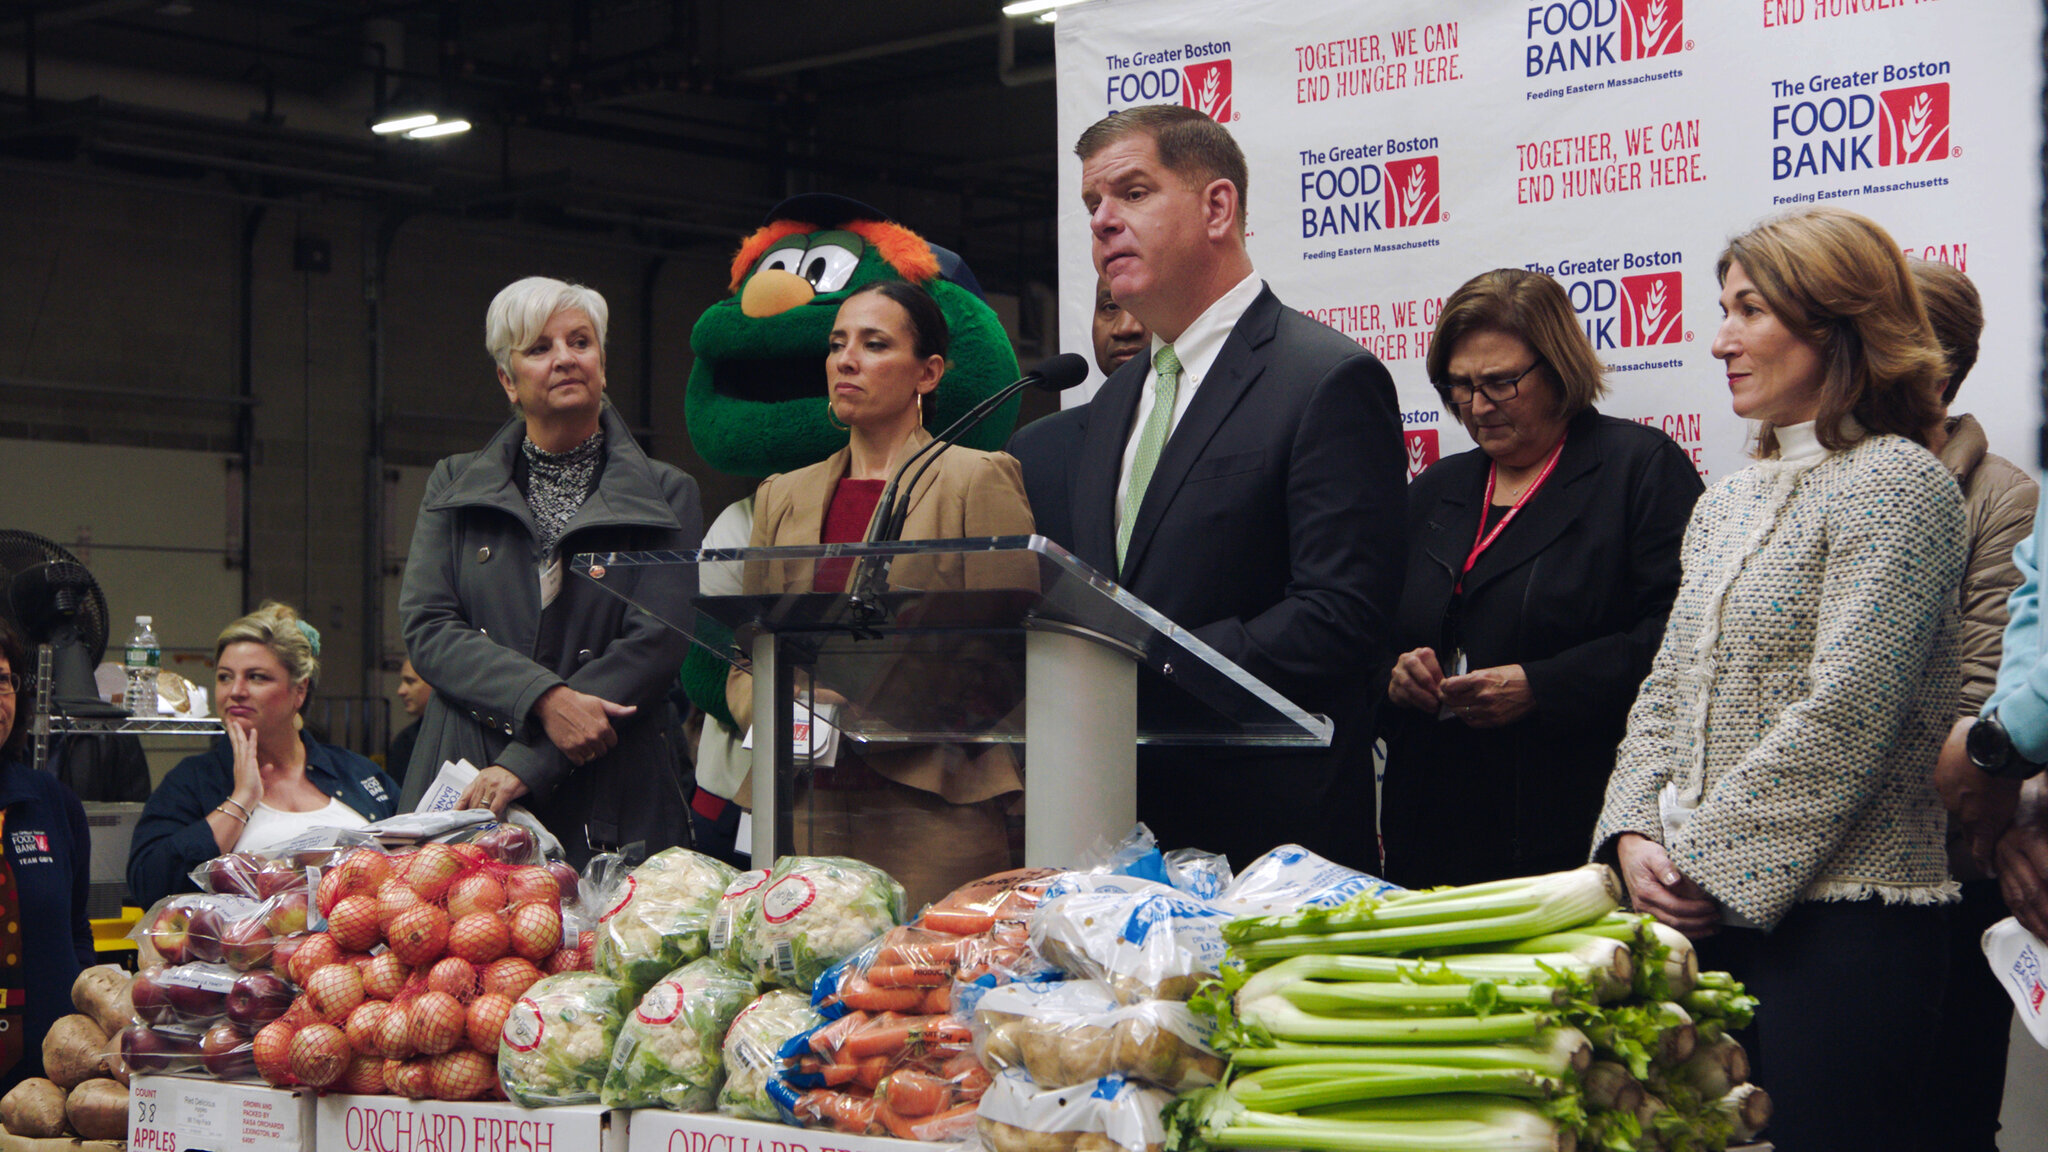 The mayor stands at a podium with several associates, flanked by the Green Monster mascot and piles of vegetables.